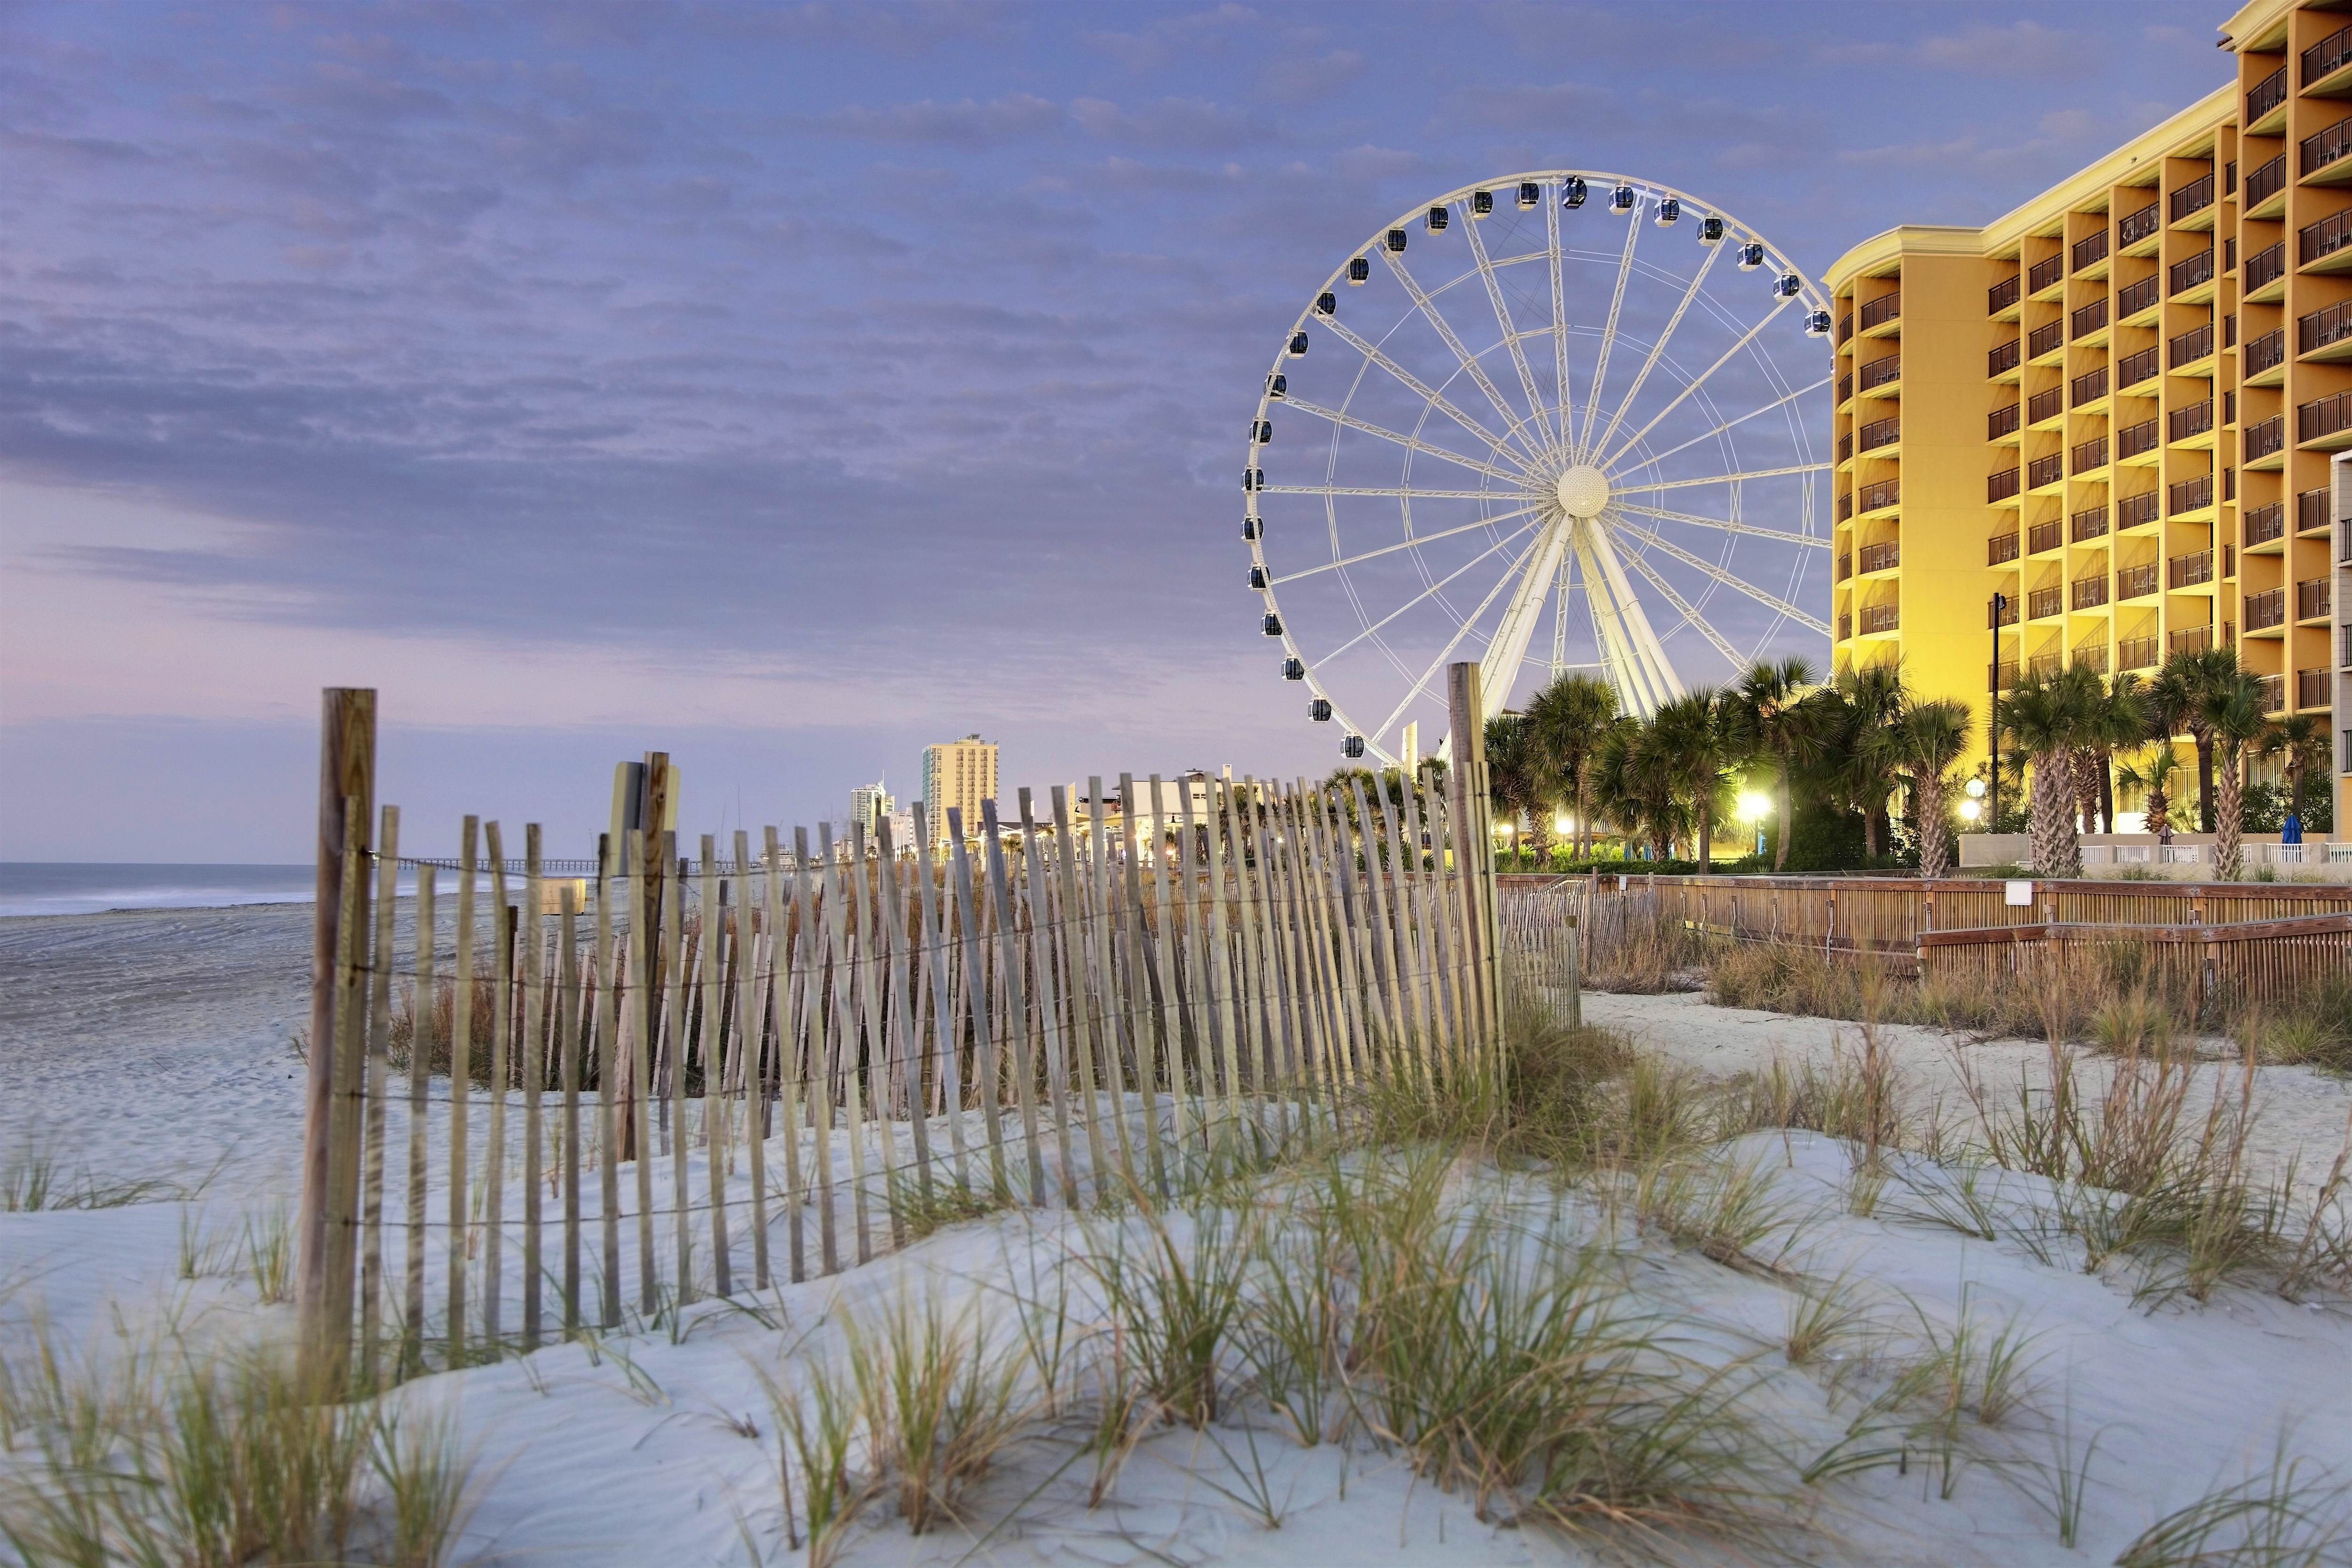 Myrtle Beach travel | Southern USA, USA - Lonely Planet